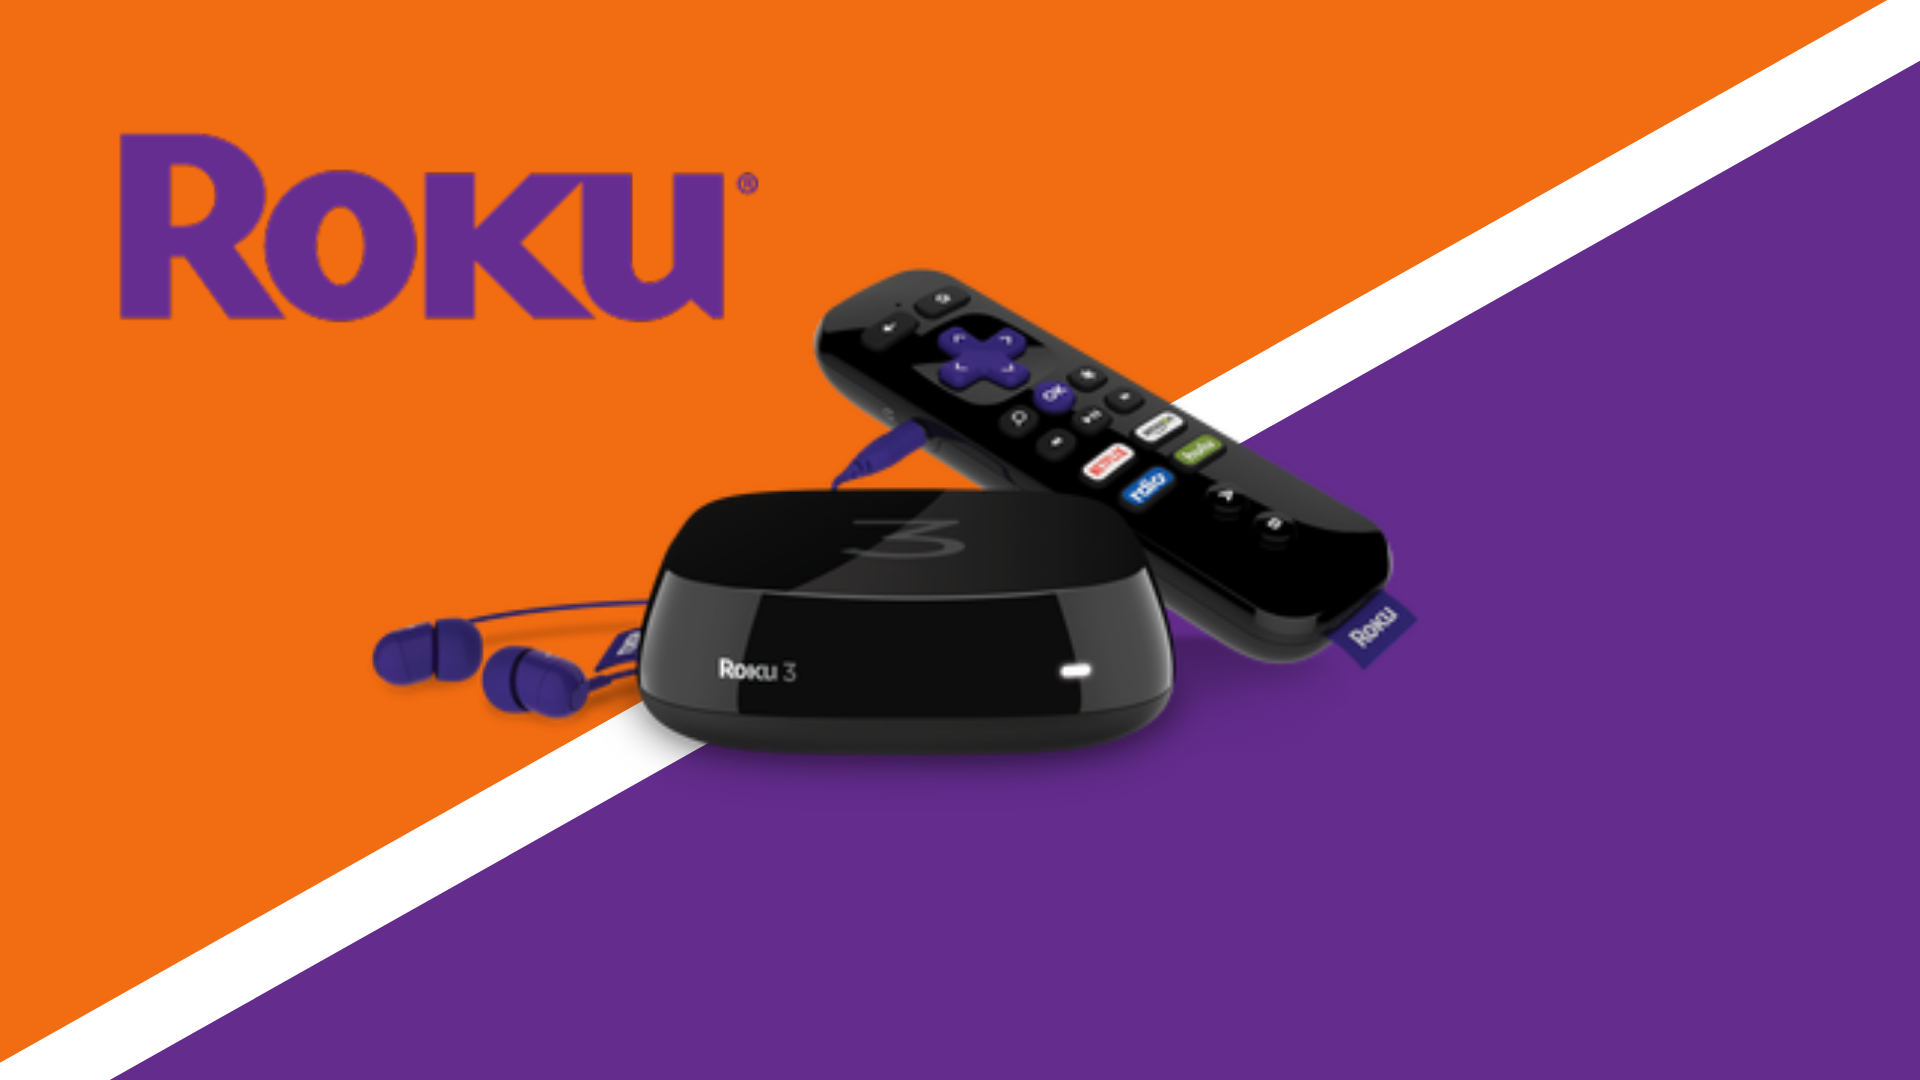 Roku beats Q2 expectations, ViacomCBS Q2 U.S. Streaming & Digital Revenue Up 25% On Subscriptions and Other Top News